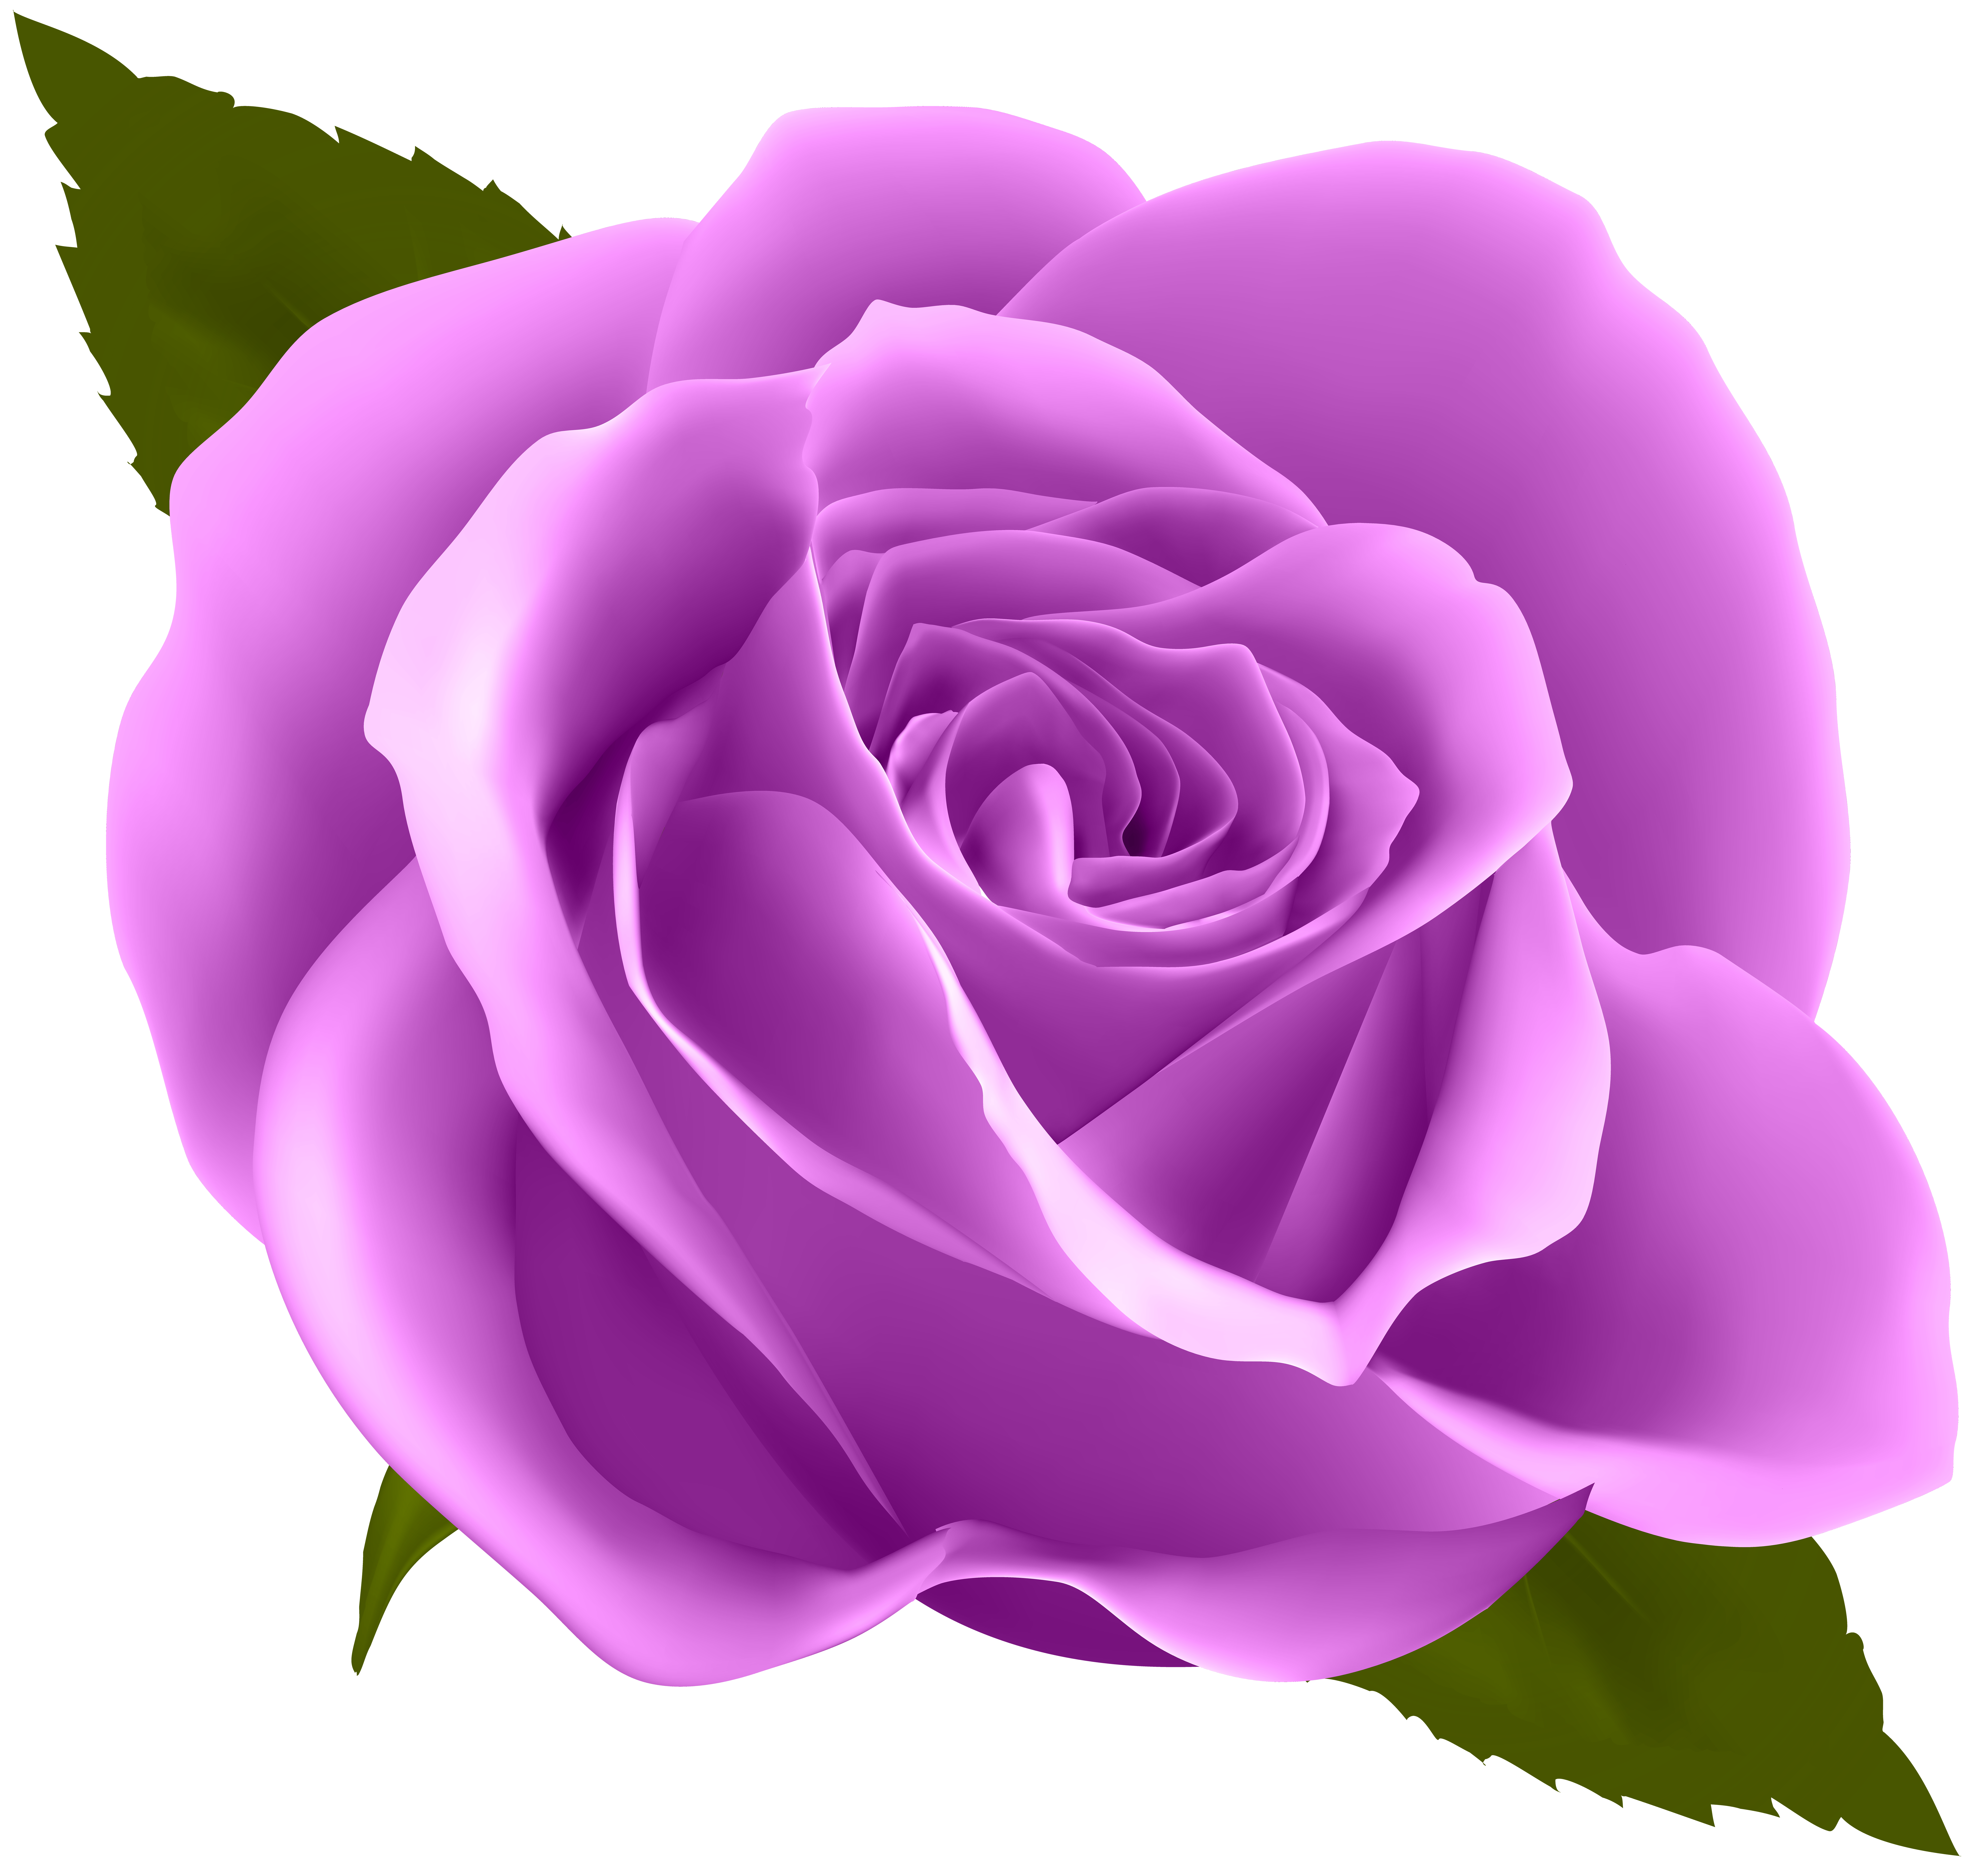 Picture #1854667 - pear clipart rose. pear clipart rose. 